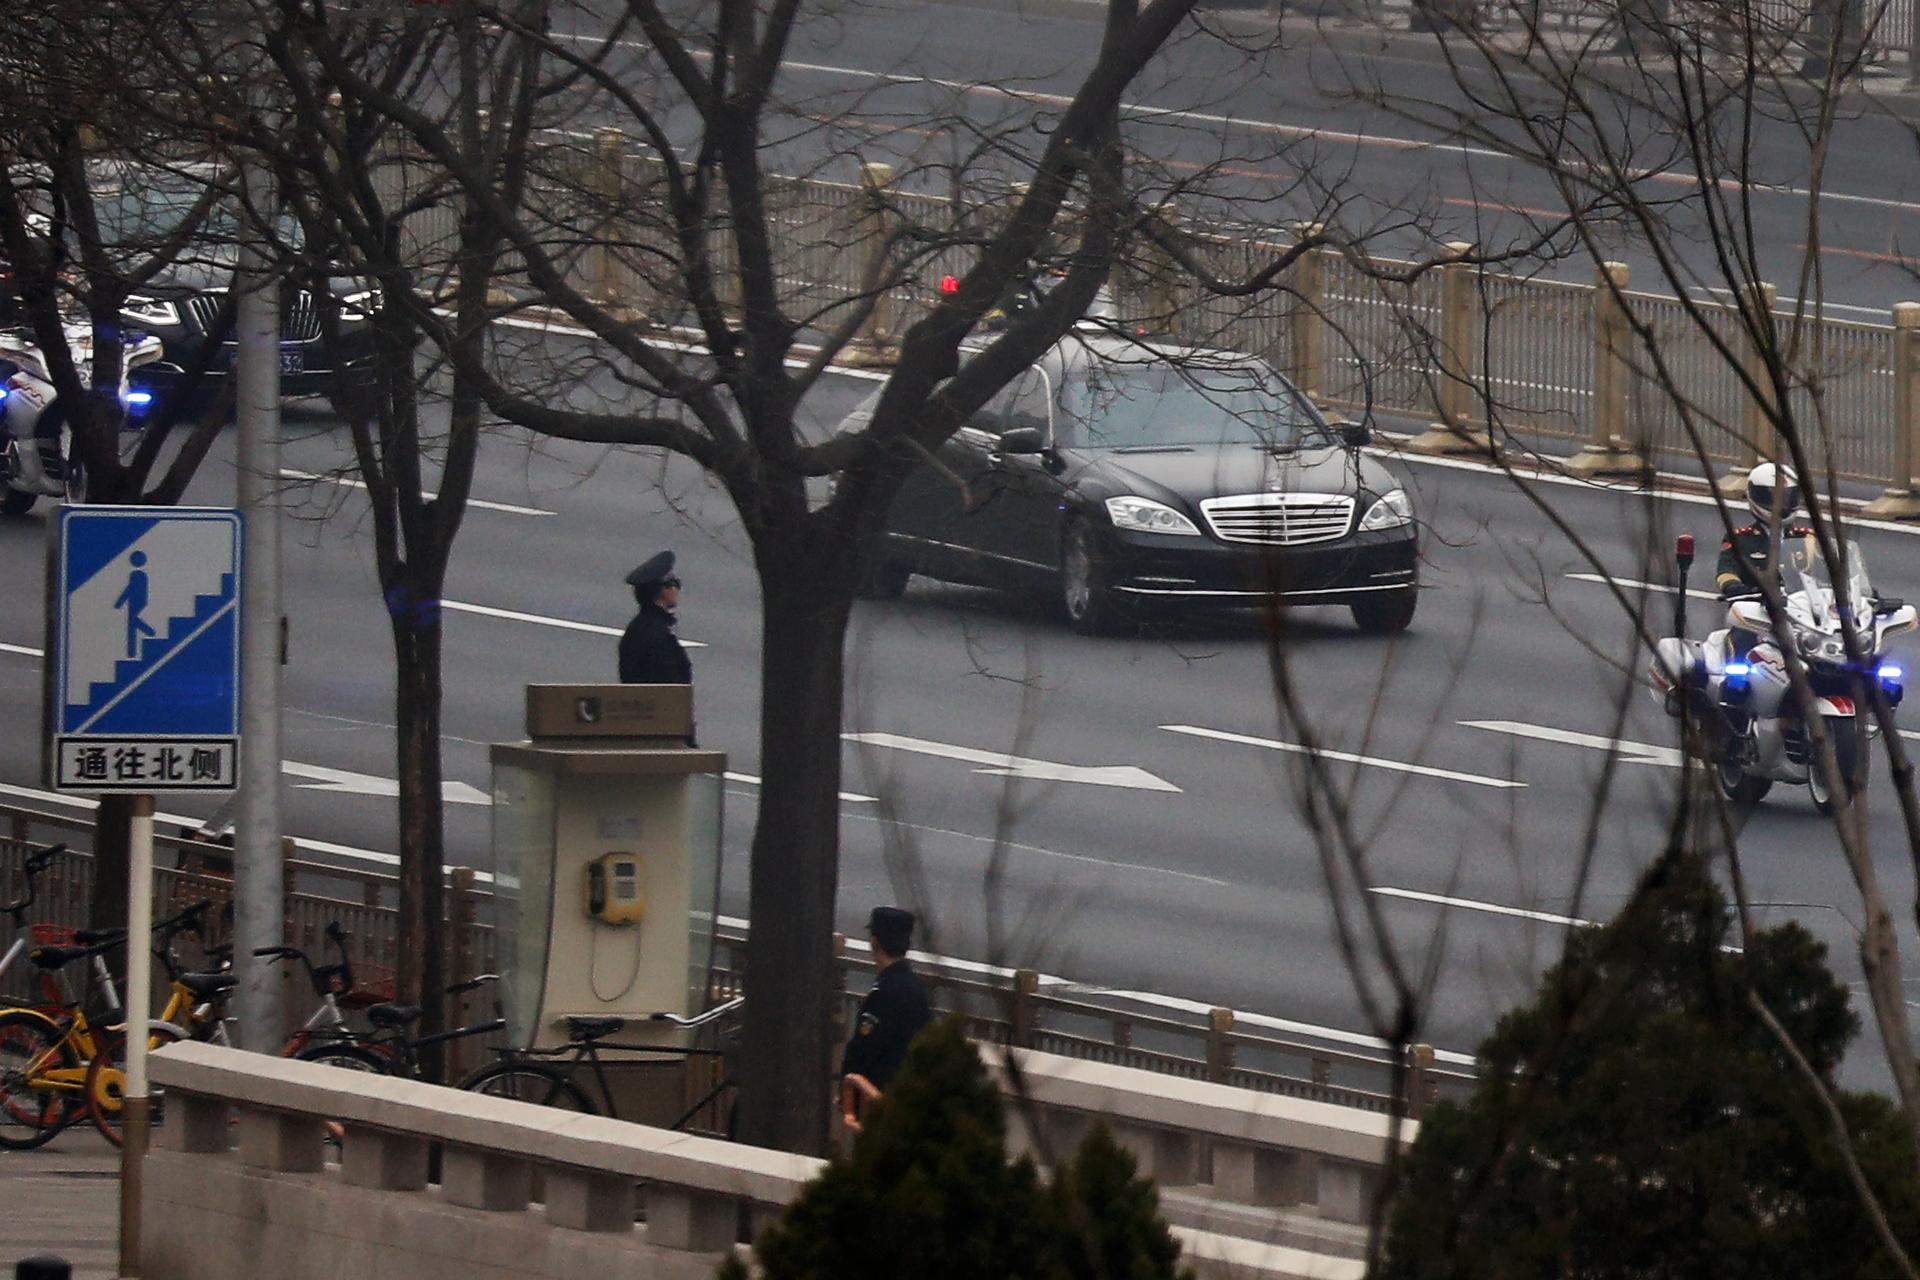 A motorcade believed to be carrying a North Korean delegation makes its way along Beijing's main east-west thoroughfare, Changan Avenue, in Beijing, China March 27, 2018.